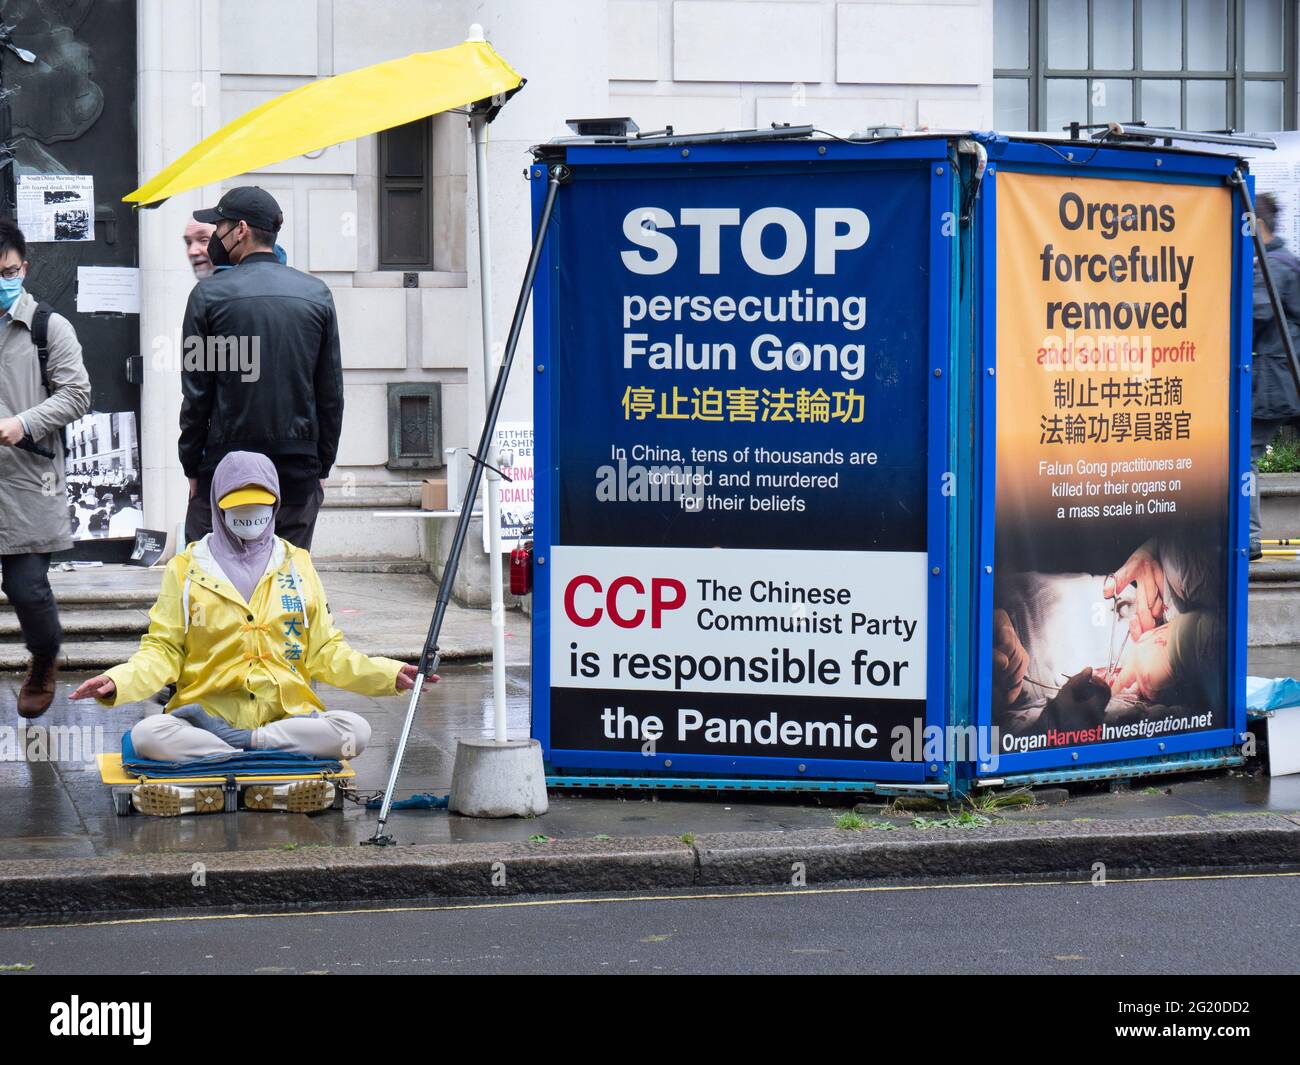 A cross legged  Falun Gong practitioner protests at  Rally outside the Chinese Embassy in London UK,  marking the 32nd anniversary of the  June 4th massacre at Tiananmen Square, China. With posters reading, Stop persecuting Falun Gong and Organs forcefully removed Stock Photo